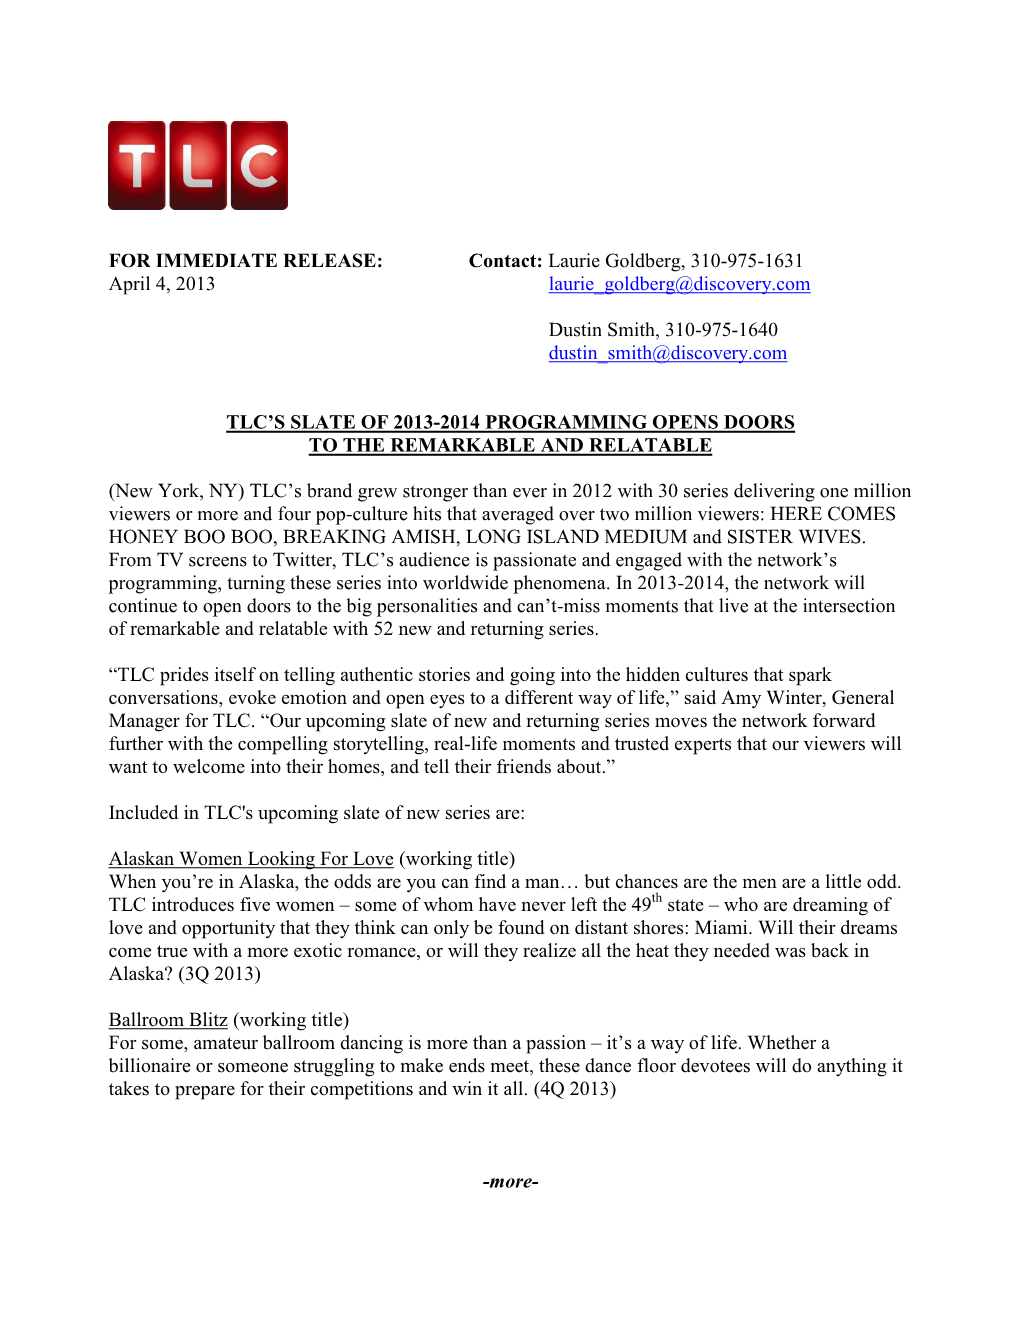 FOR IMMEDIATE RELEASE: Contact: Laurie Goldberg, 310-975-1631 April 4, 2013 Laurie Goldberg@Discovery.Com